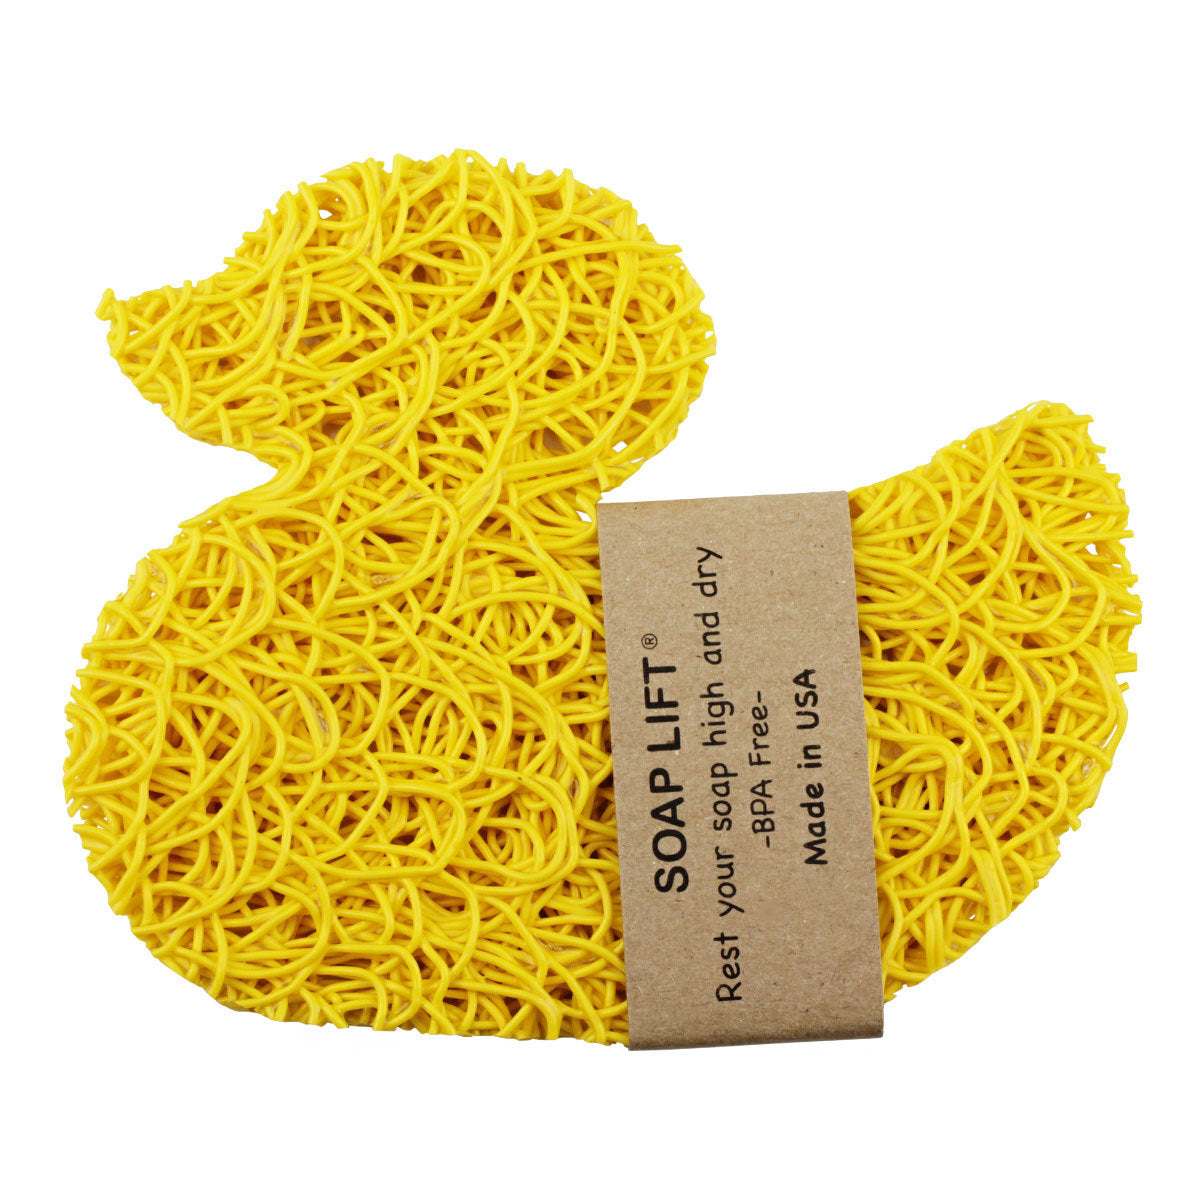 Primary image of Yellow Duck Soap Lift